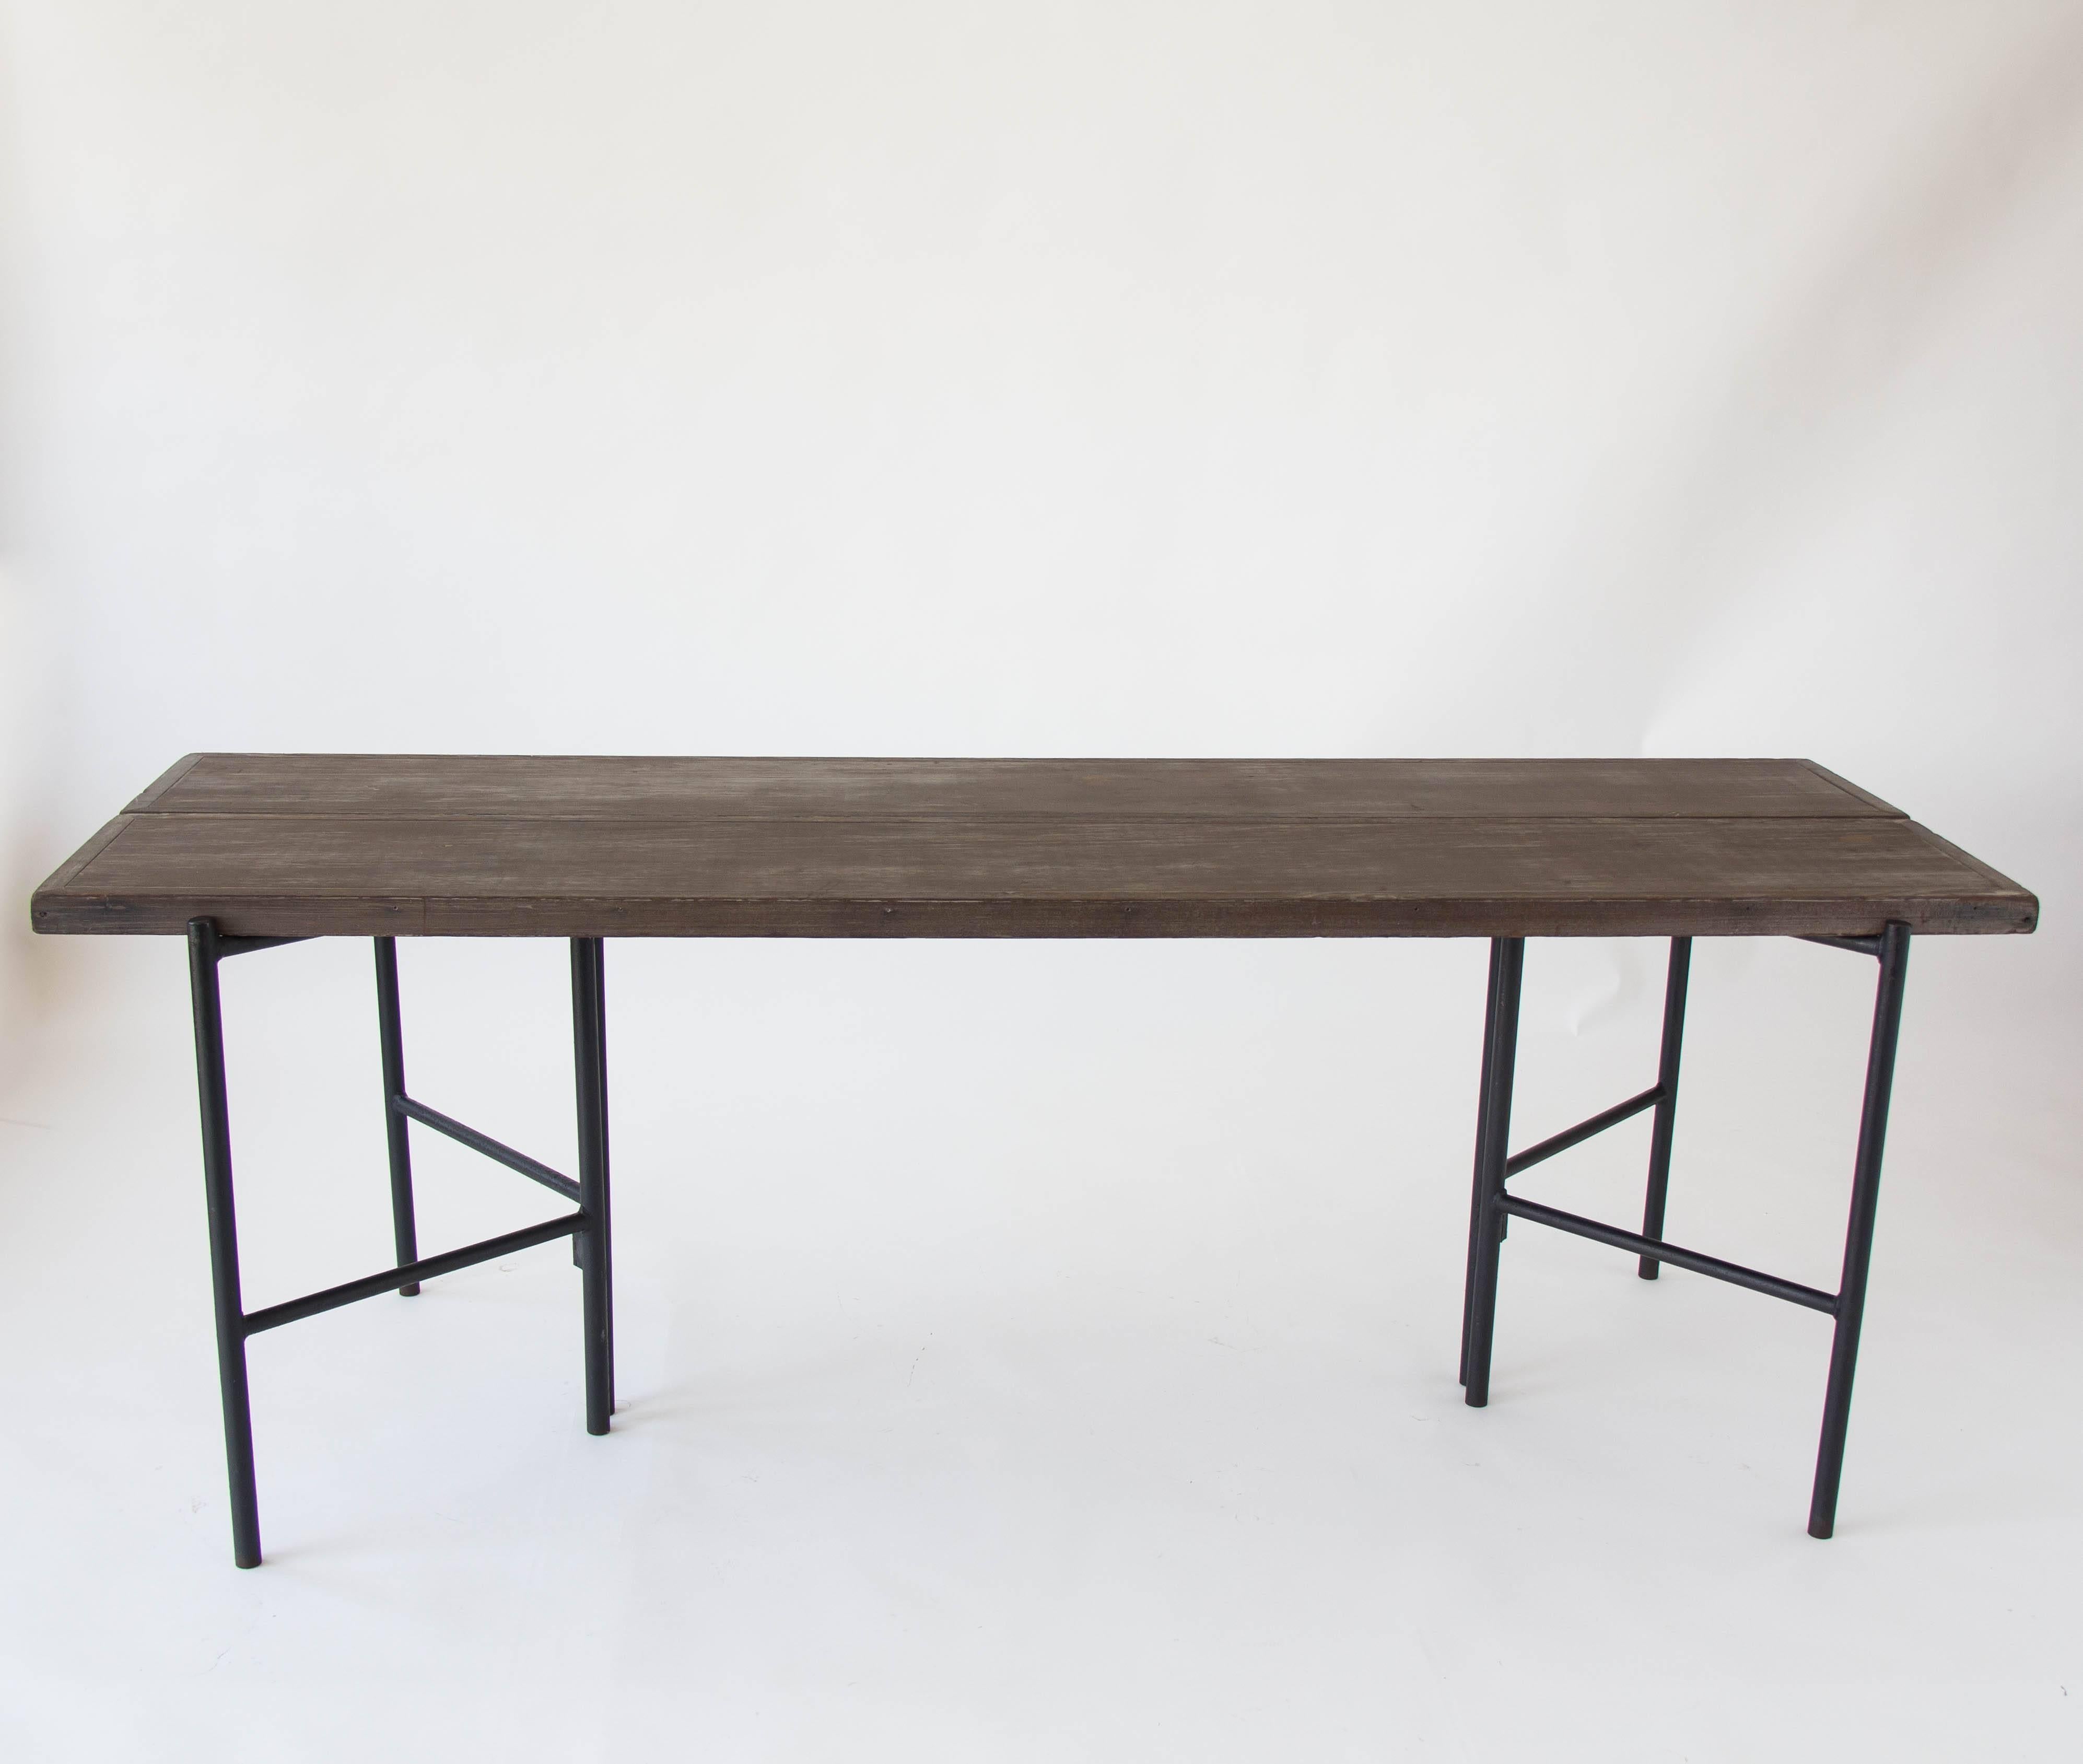 The refectory table by Hendrik Van Keppel and Taylor Green has a modular gate-leg design. Two brackets of enameled steel can be positioned to support two long boards of aged redwood as a slatted table. Or the brackets can be rotated and the boards